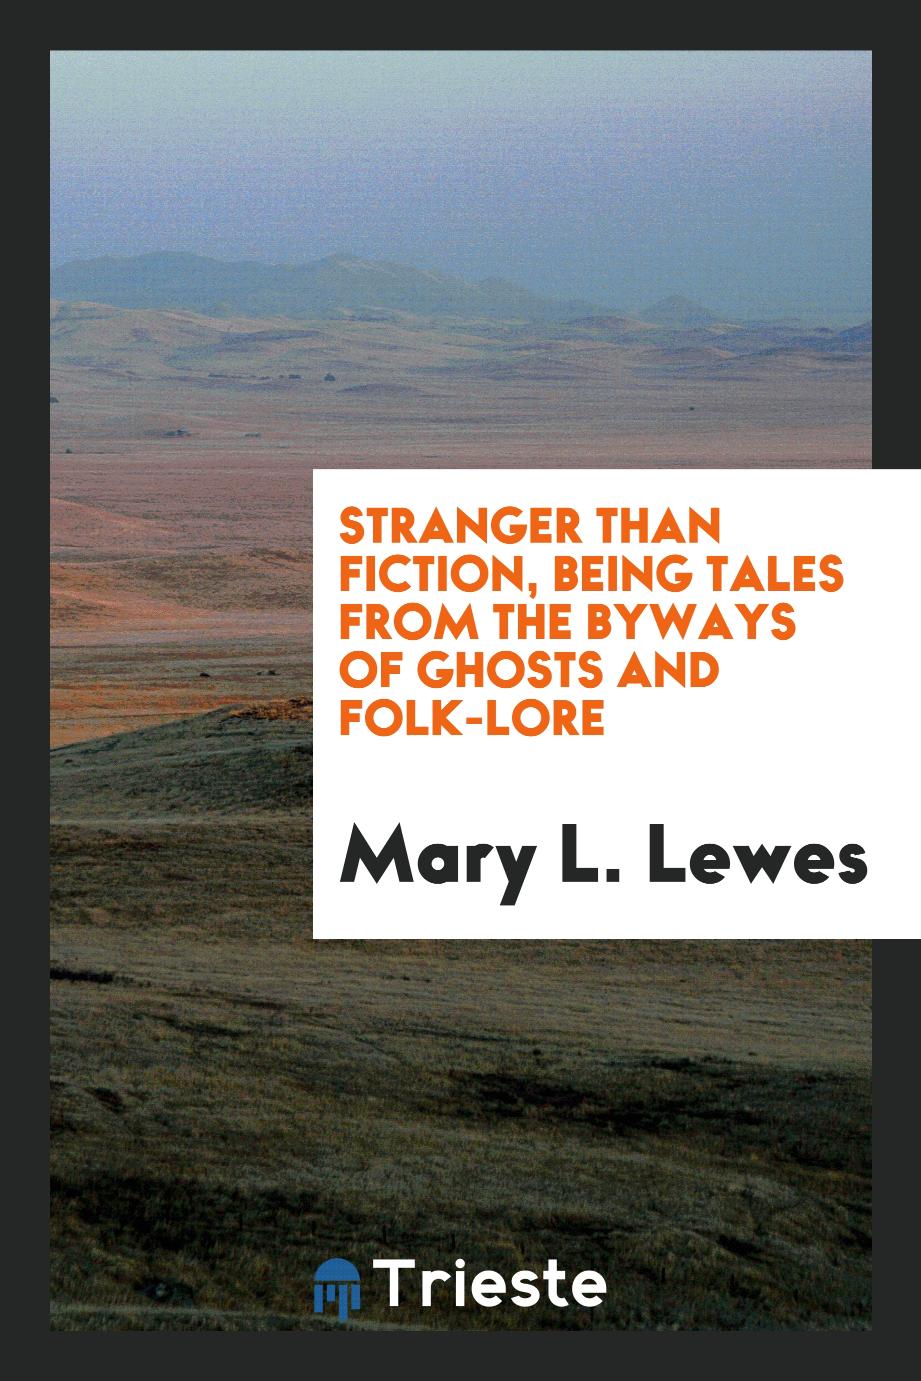 Stranger Than Fiction, Being Tales from the Byways of Ghosts and Folk-lore